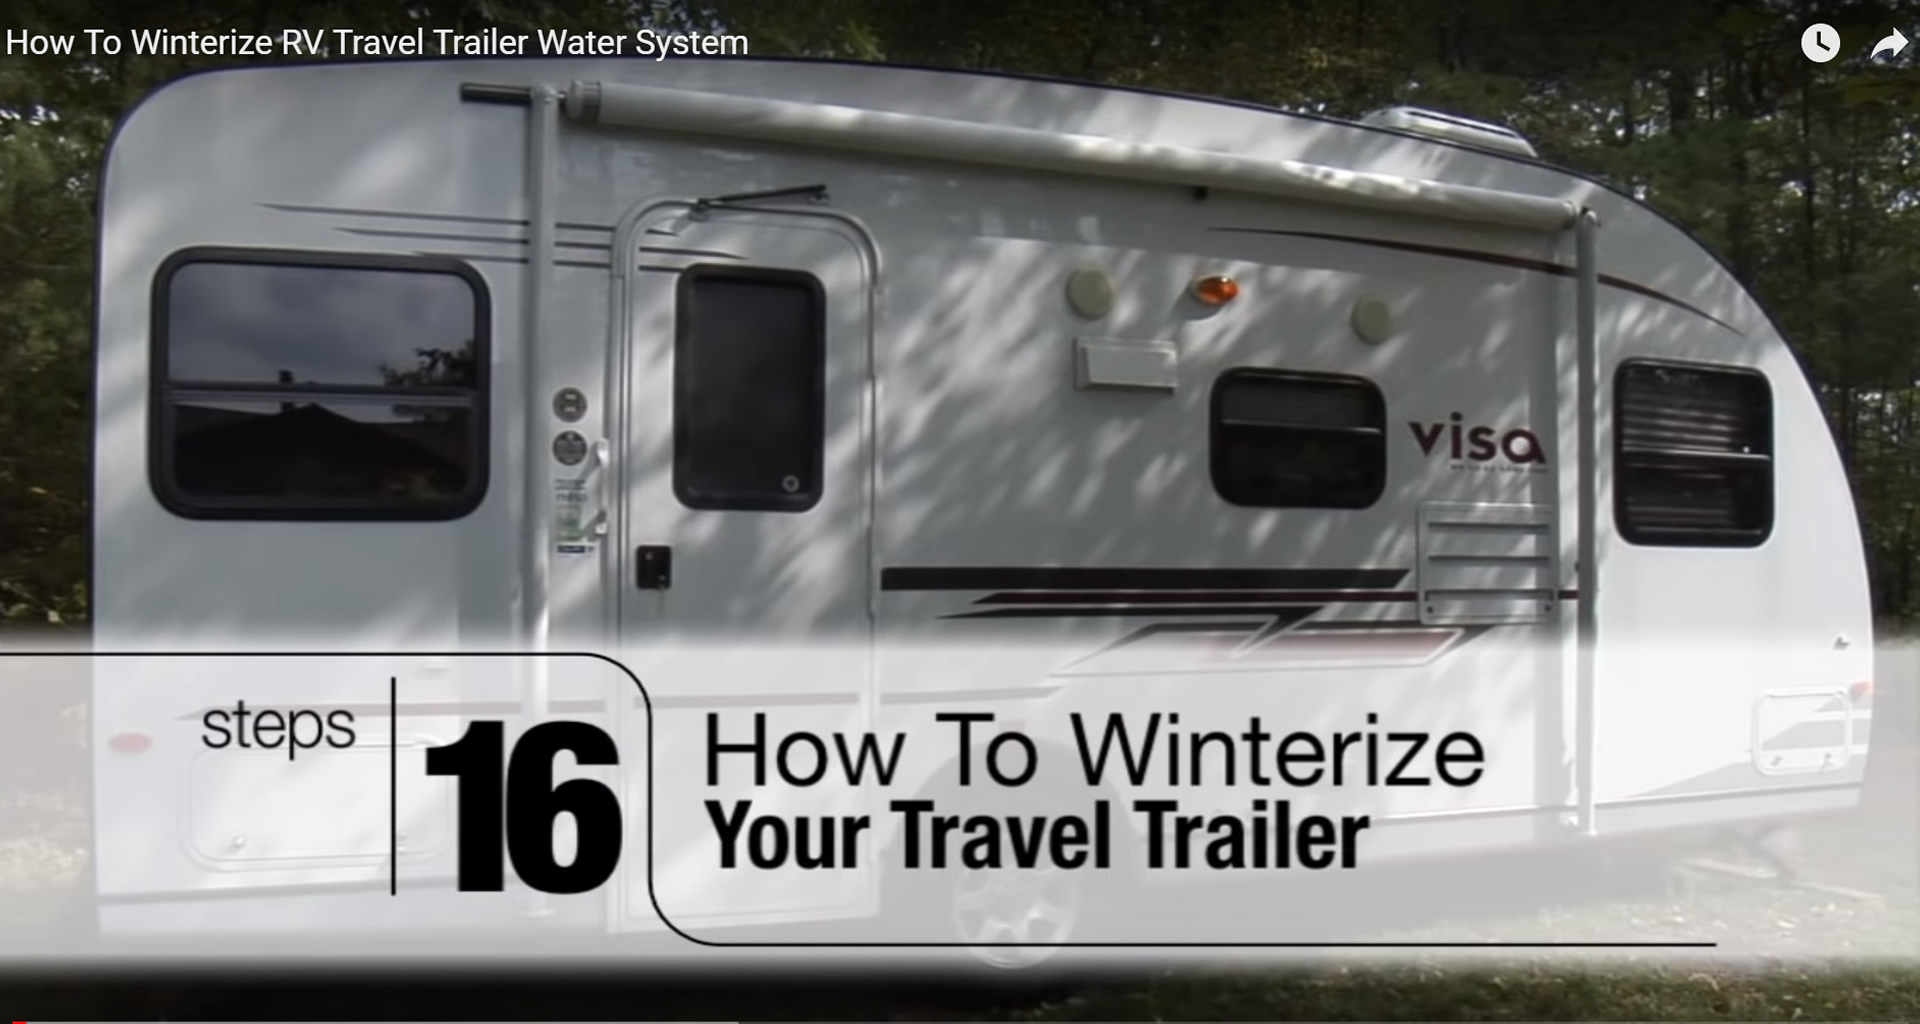 16 Steps - How to Winterize Your RV Travel Trailer